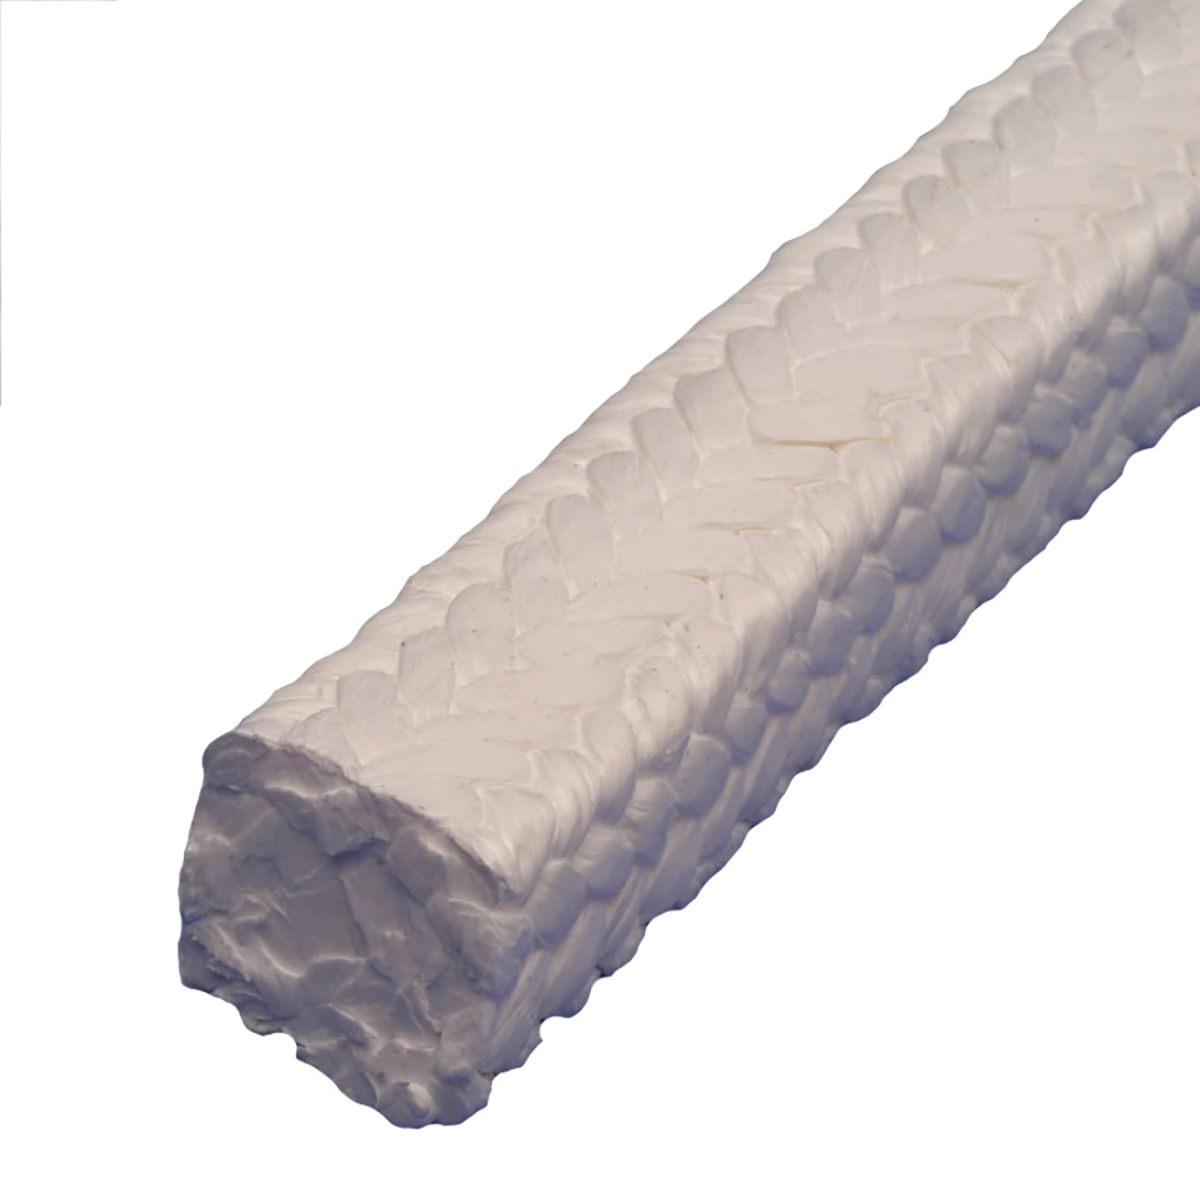 A high quality packing braided from pure PTFE fibres, Marigold 344 Packing offers outstanding chemical resistance coupled with very low friction performance